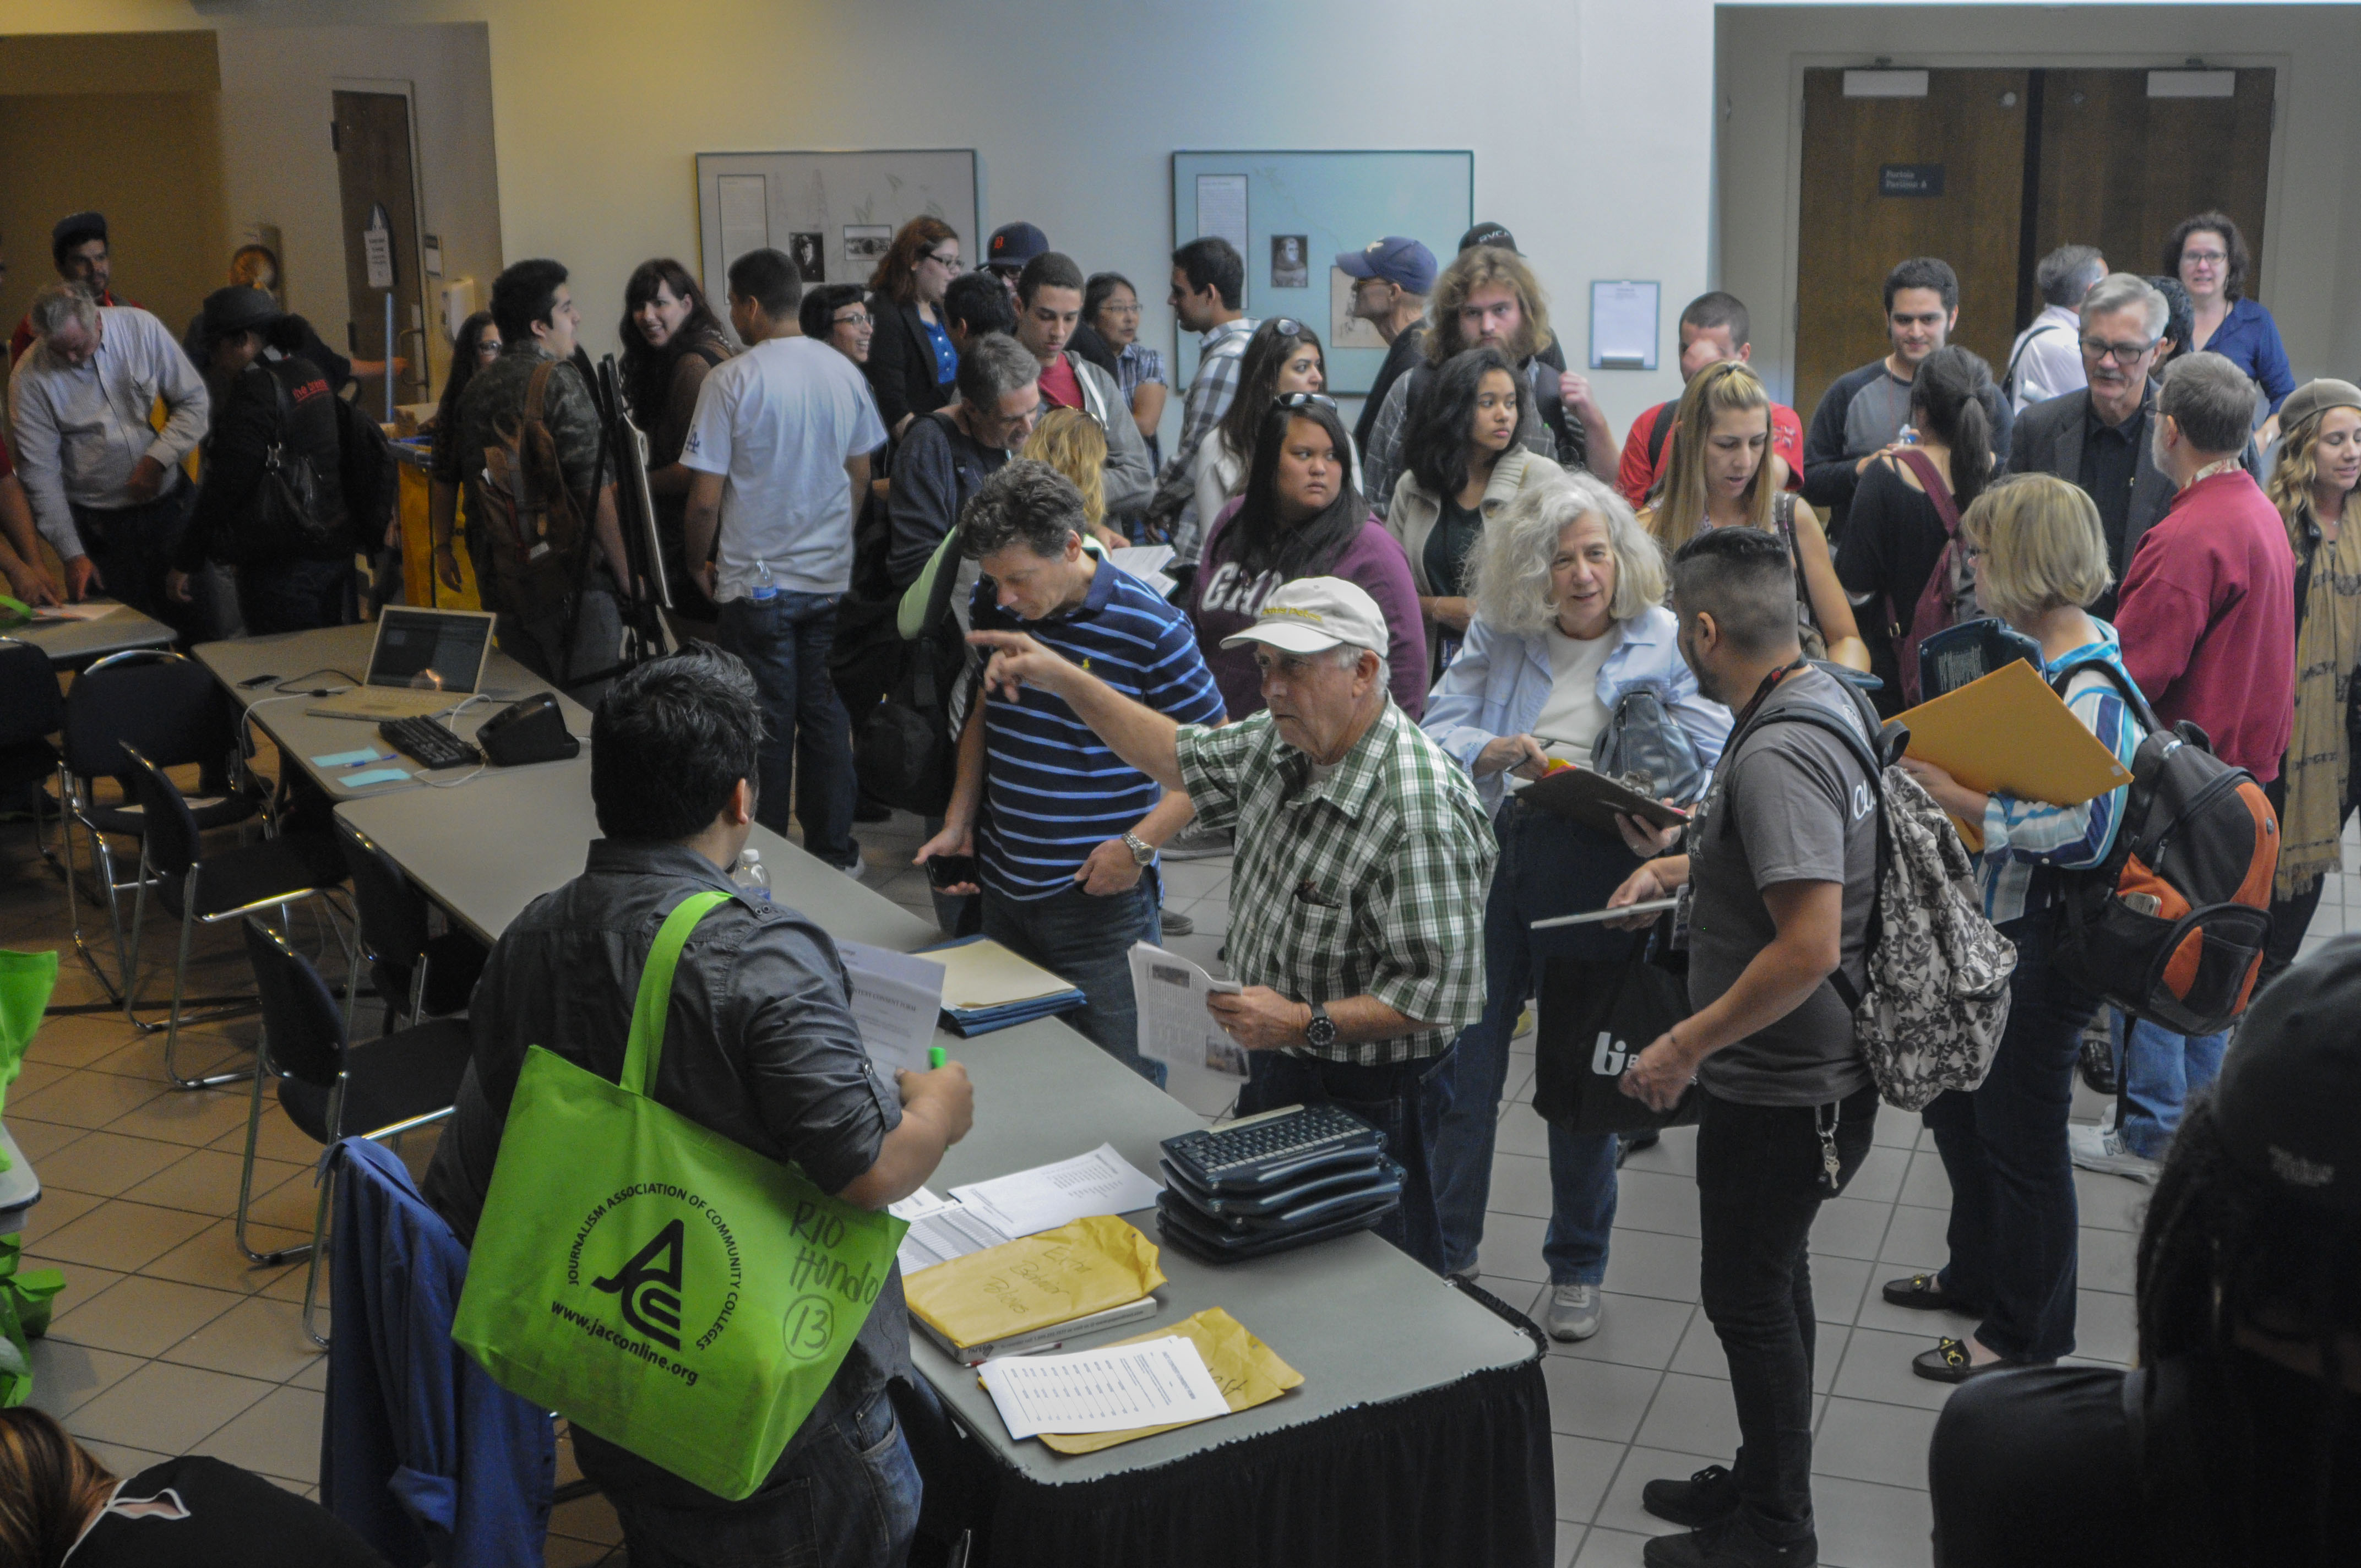 Groups of students and their advisors line up for registration at the JACC SoCal Conference (Journalism Association of Community Colleges) at CSU Fullerton, Fullerton on Friday, Oct. 11, 2013. (Telescope Staff/The Telescope)